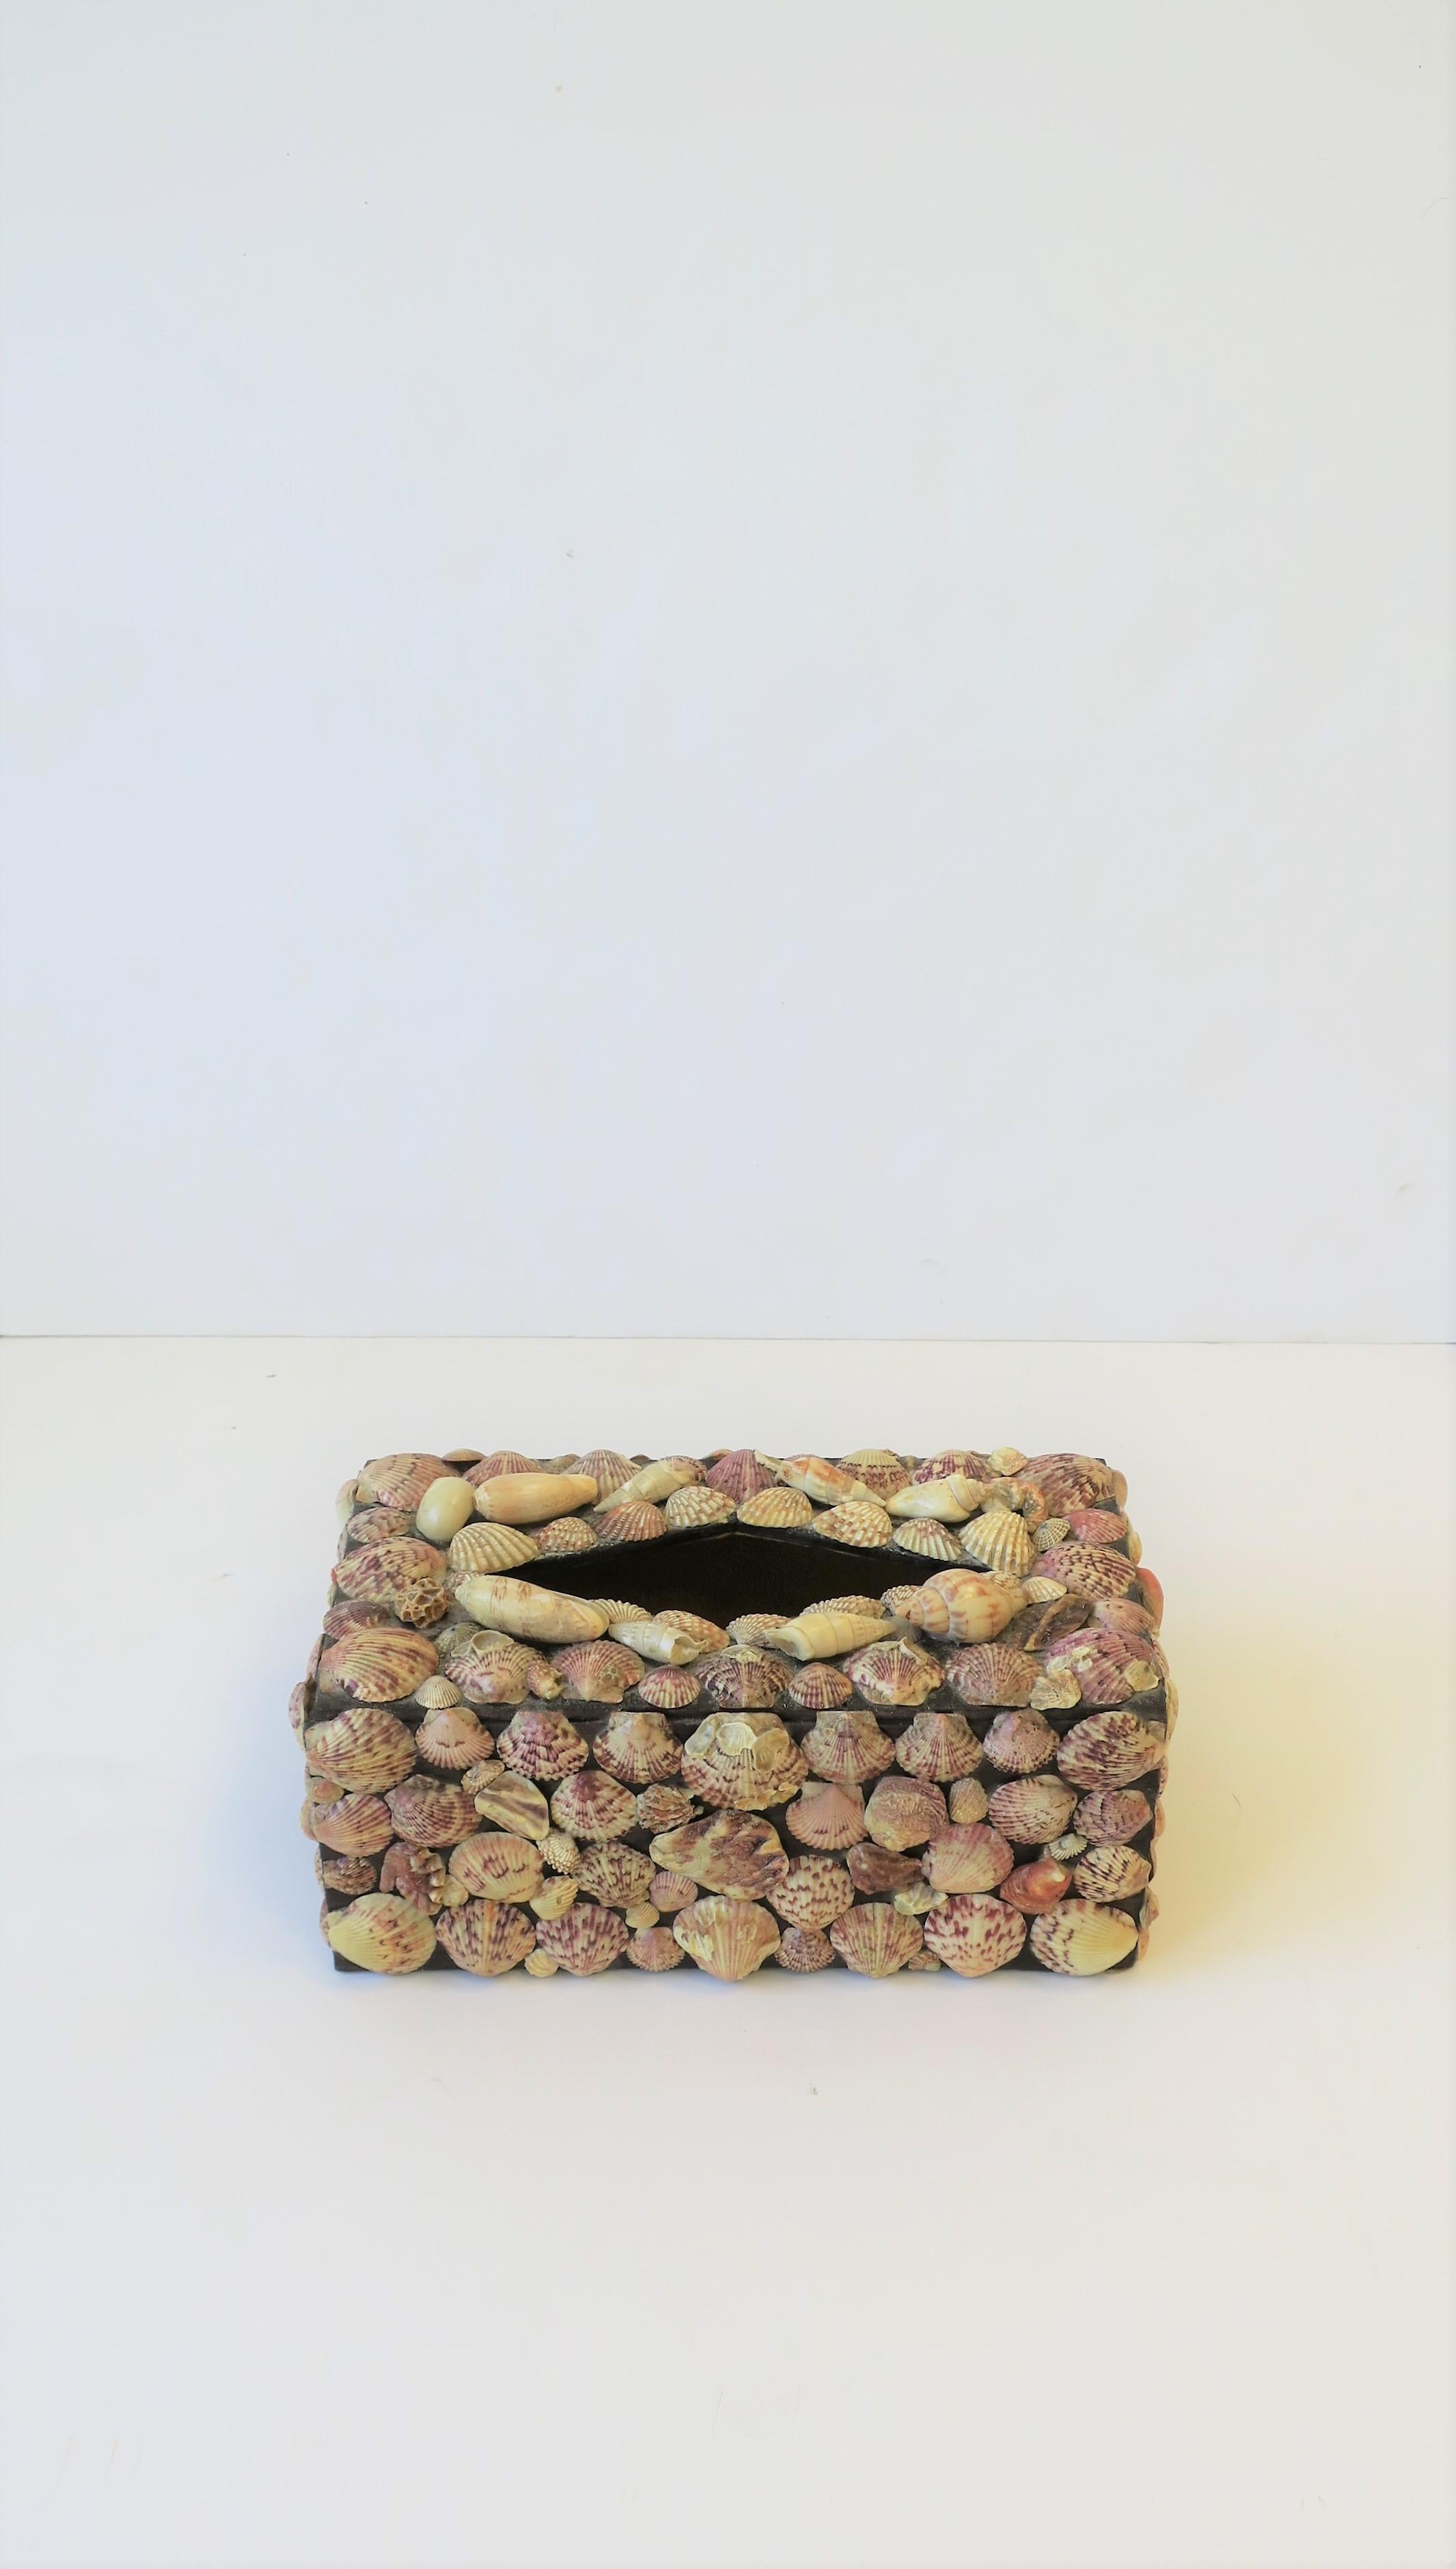 A very beautiful vintage seashell [sea shell] tissue box holder cover, circa 1960s. Box is wood and covered with scallop shells and other seashells. Beautiful marque opening at top, see image #5. Great for a bathroom, vanity area, bedroom, office,